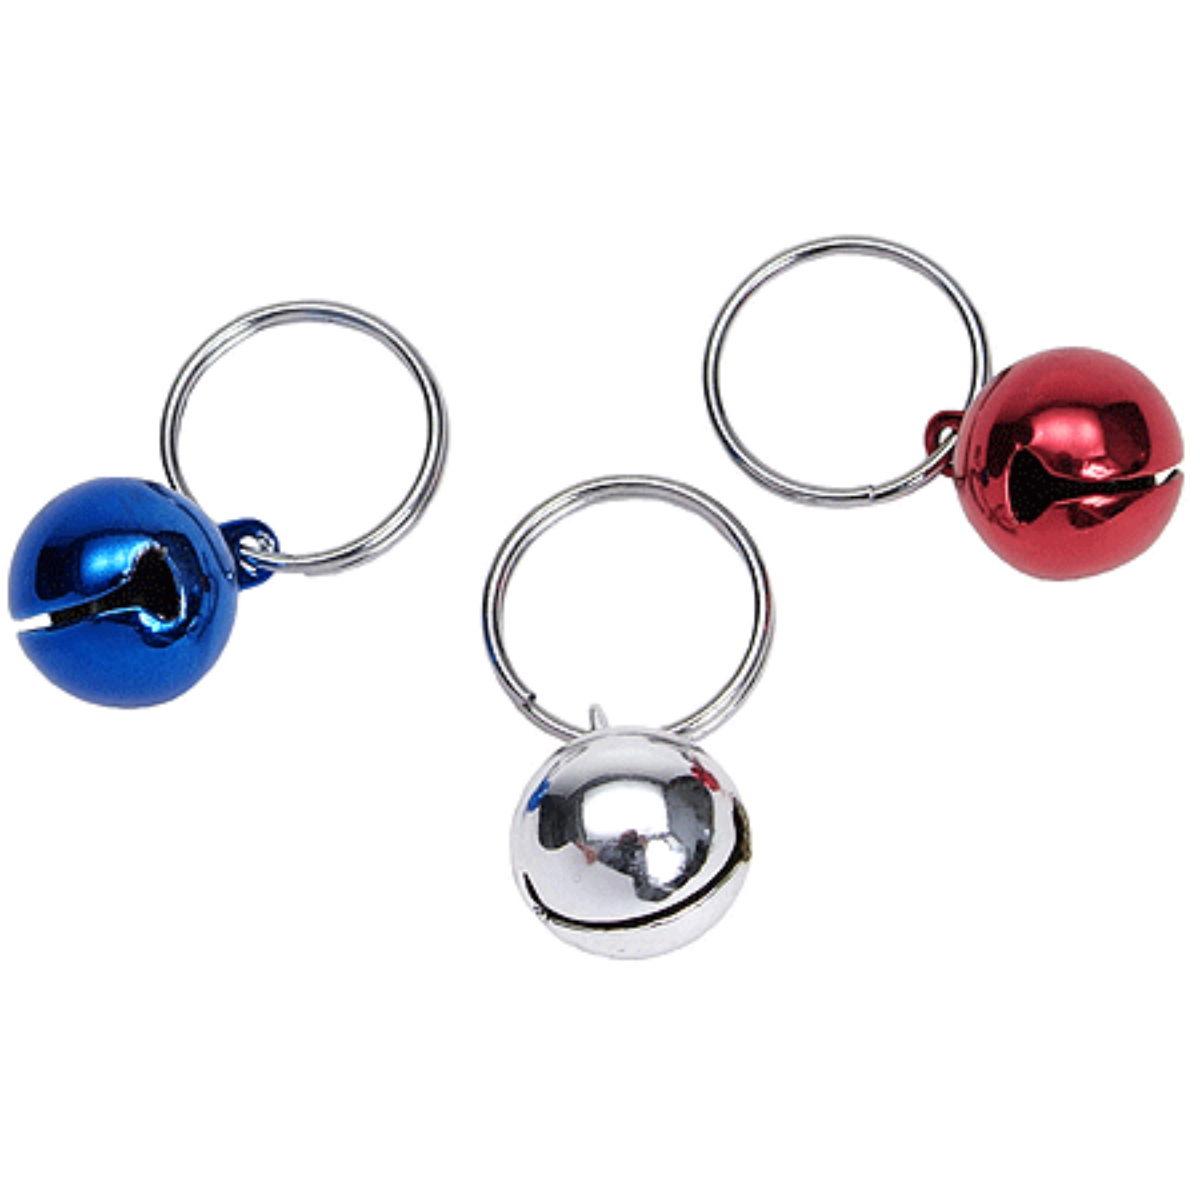 Coastal Pet Bells Collar Attachment - Red, Silver, and Blue